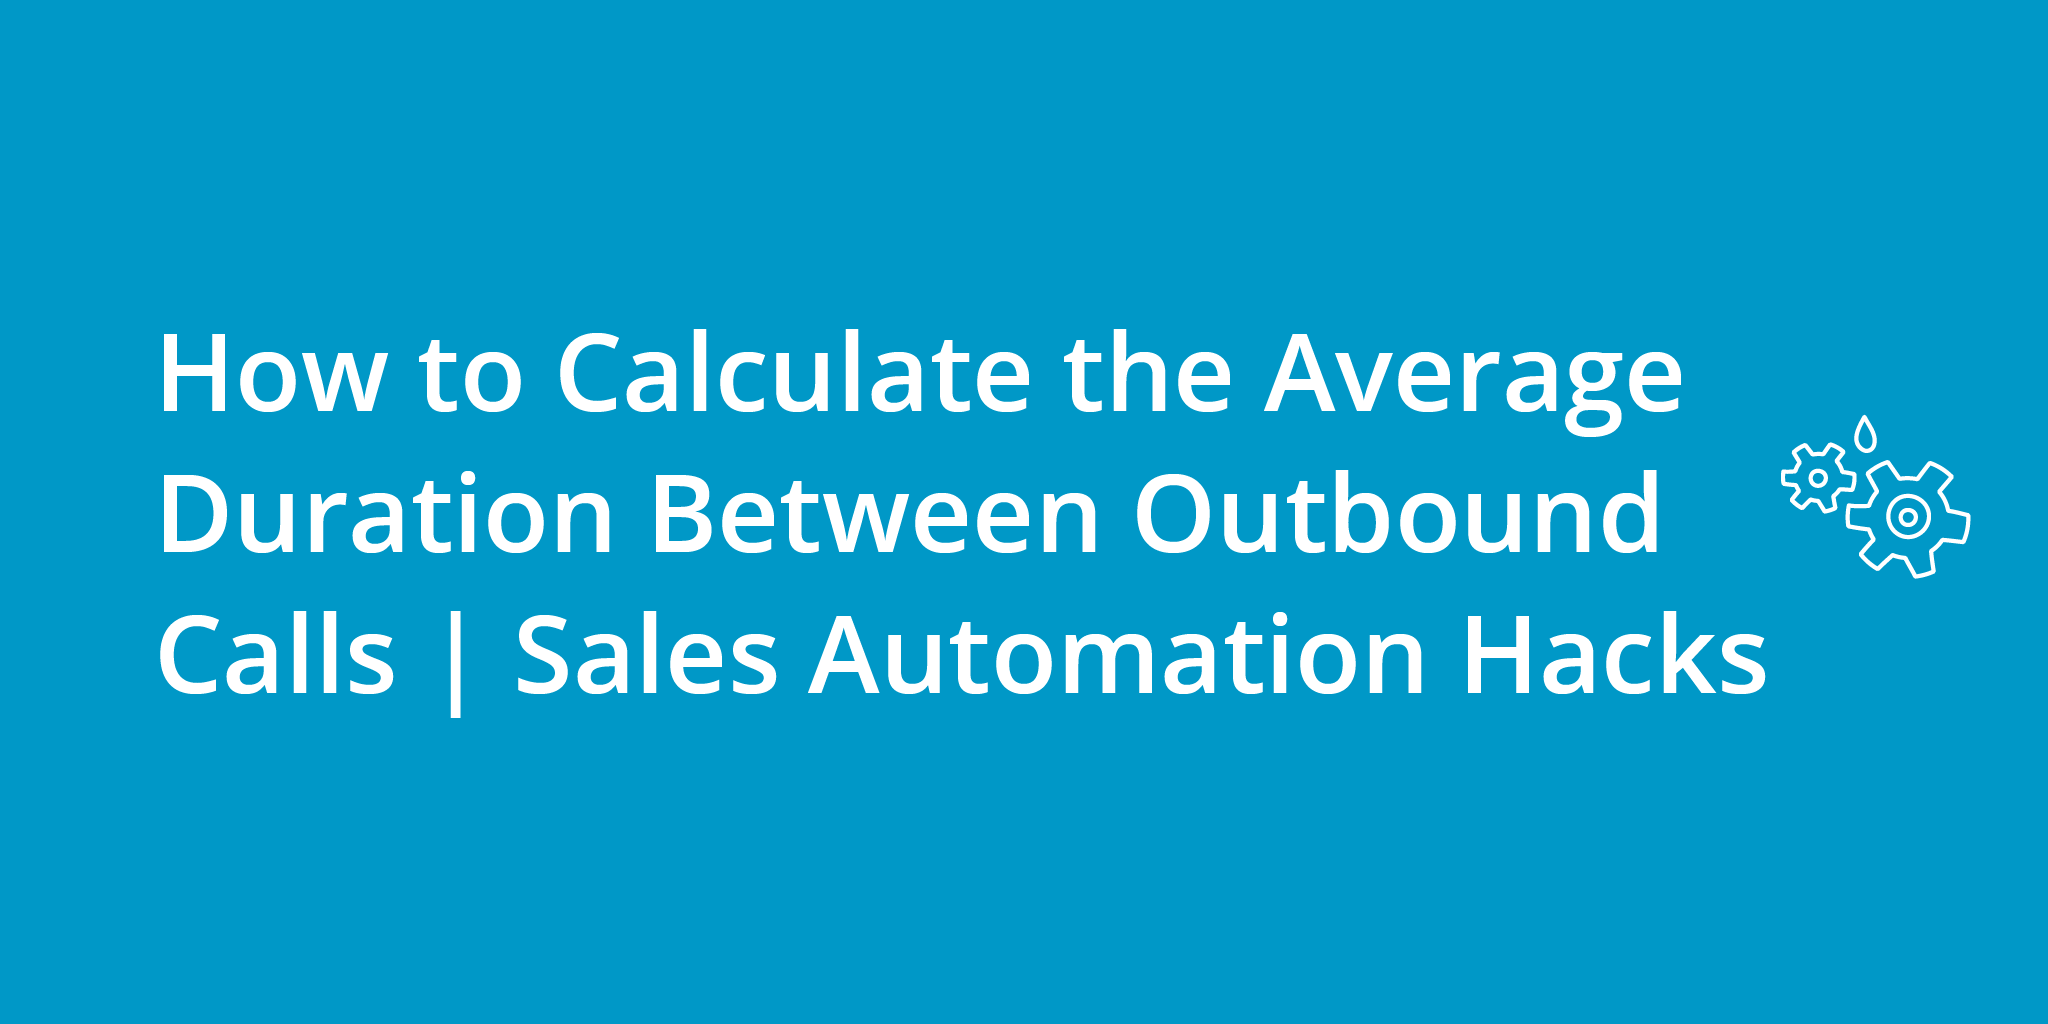 How to Calculate the Average Duration Between Outbound Calls | Sales Automation Hacks | Telephones for business